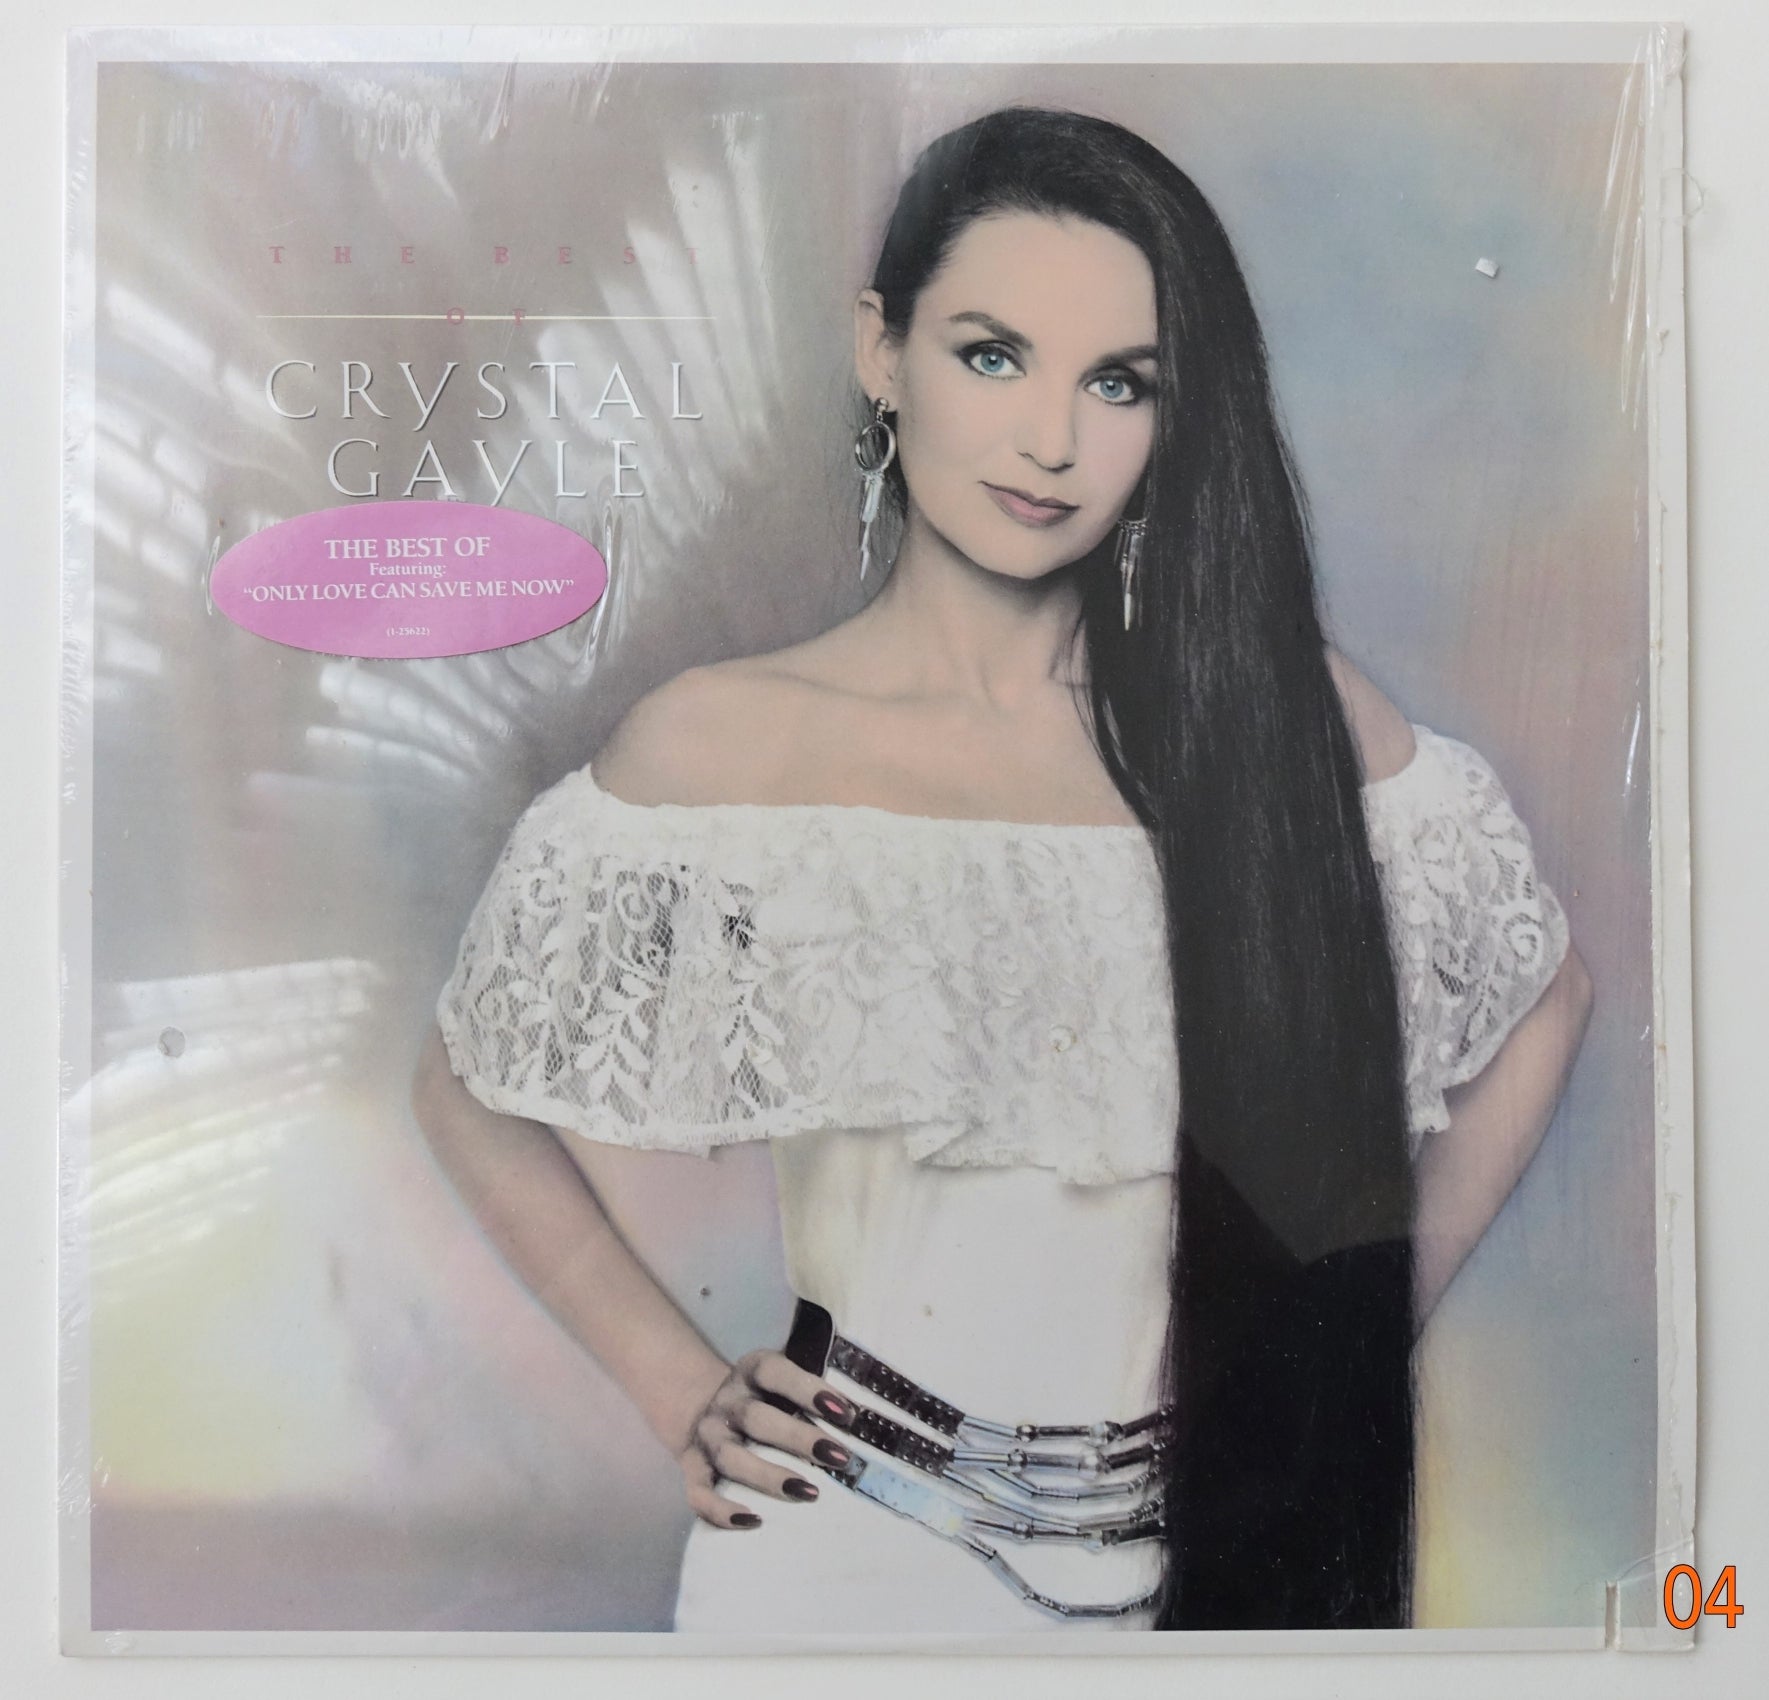 WBR002: The Best of Crystal Gayle